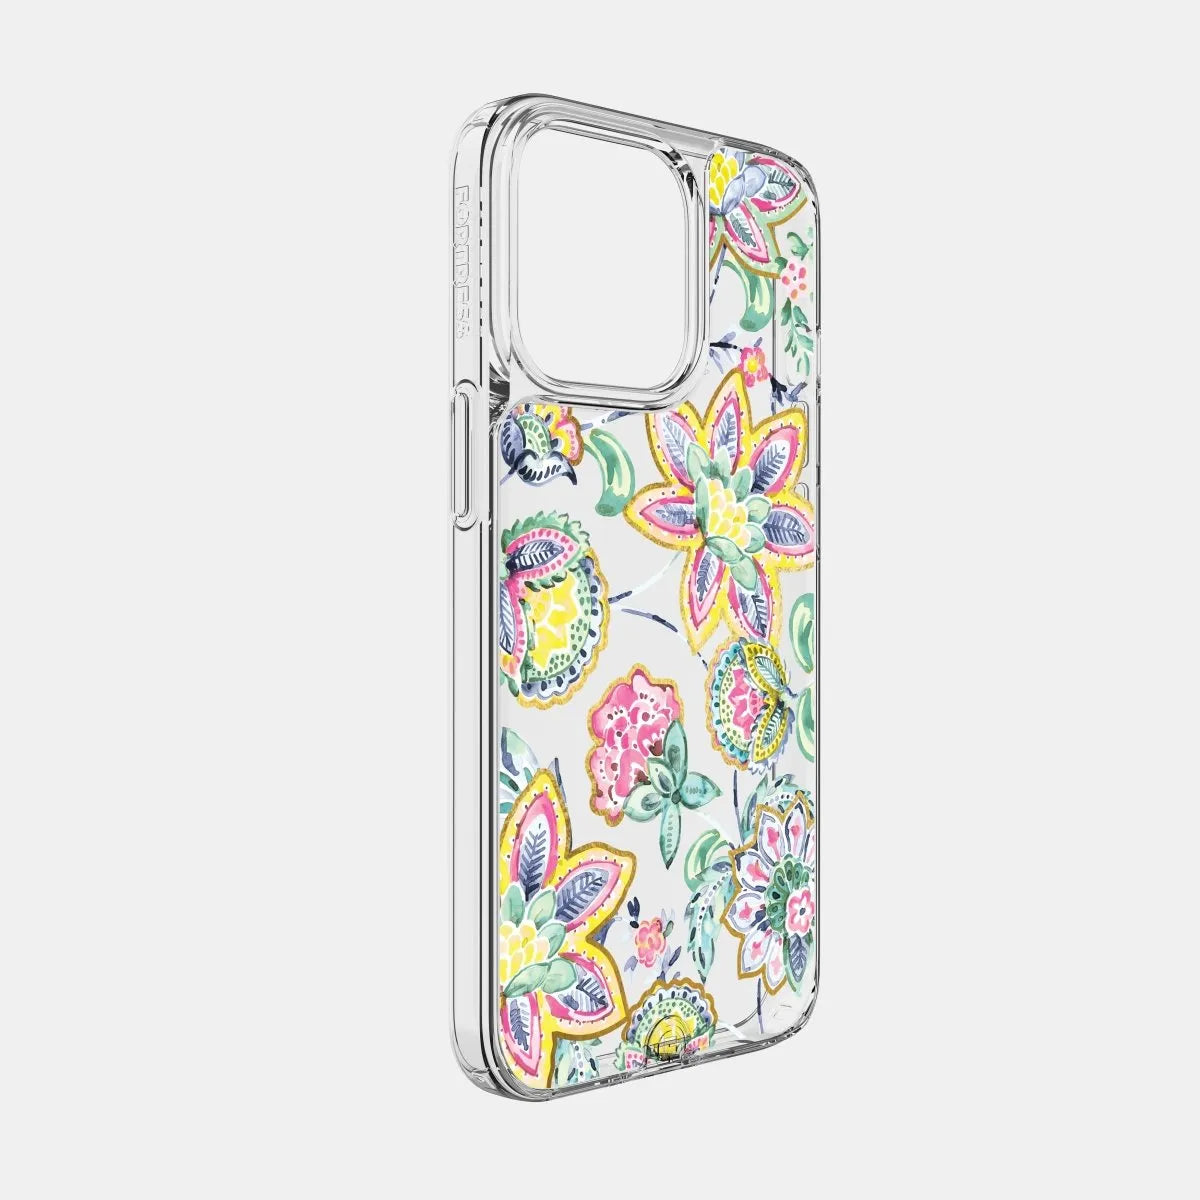 Fortress Fortress Swipe Style Inserts (Floral Forms Collection) for iPhone 13 Infinite Glass Case  Infinite Glass 